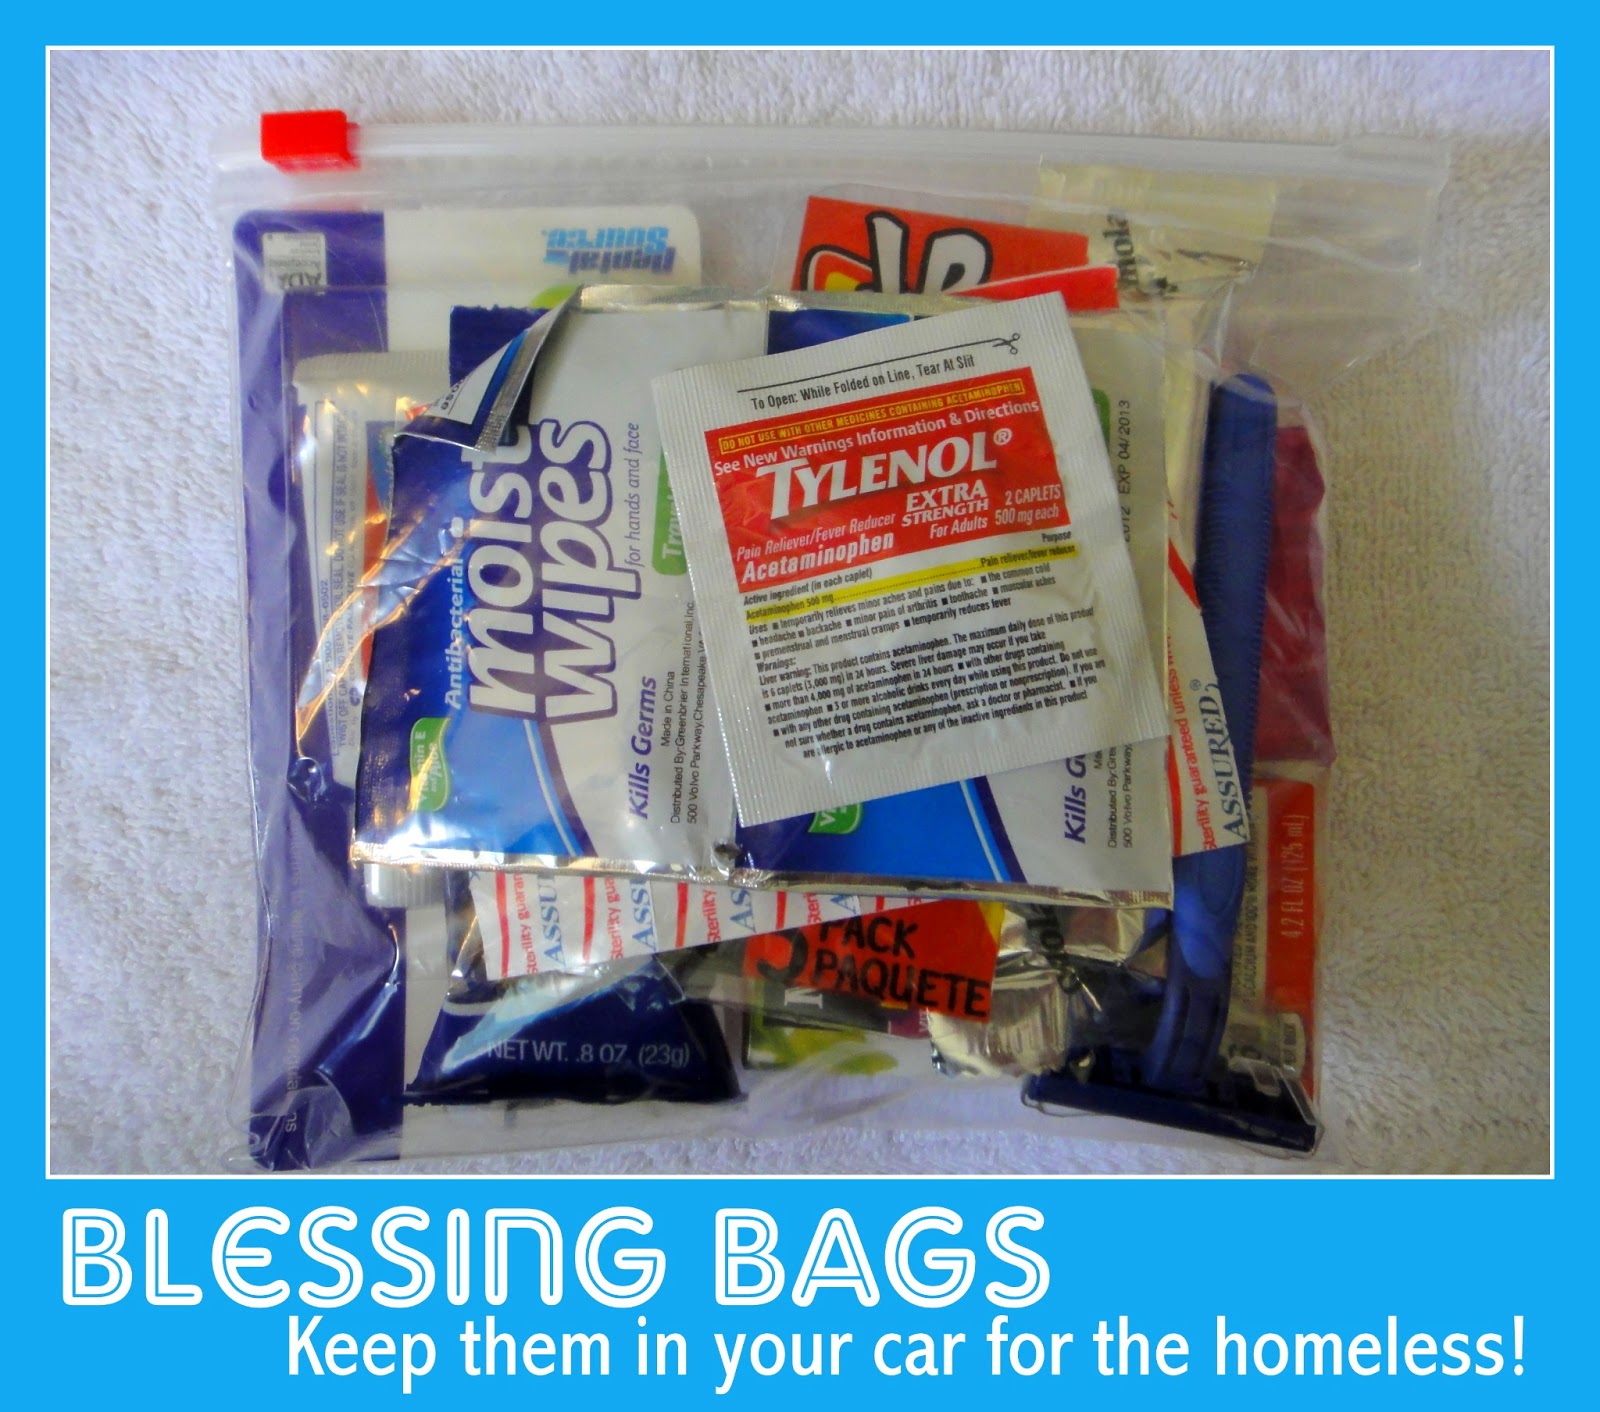 Scouts 1st Claremont Scouts • Blessing Bags and Community Service